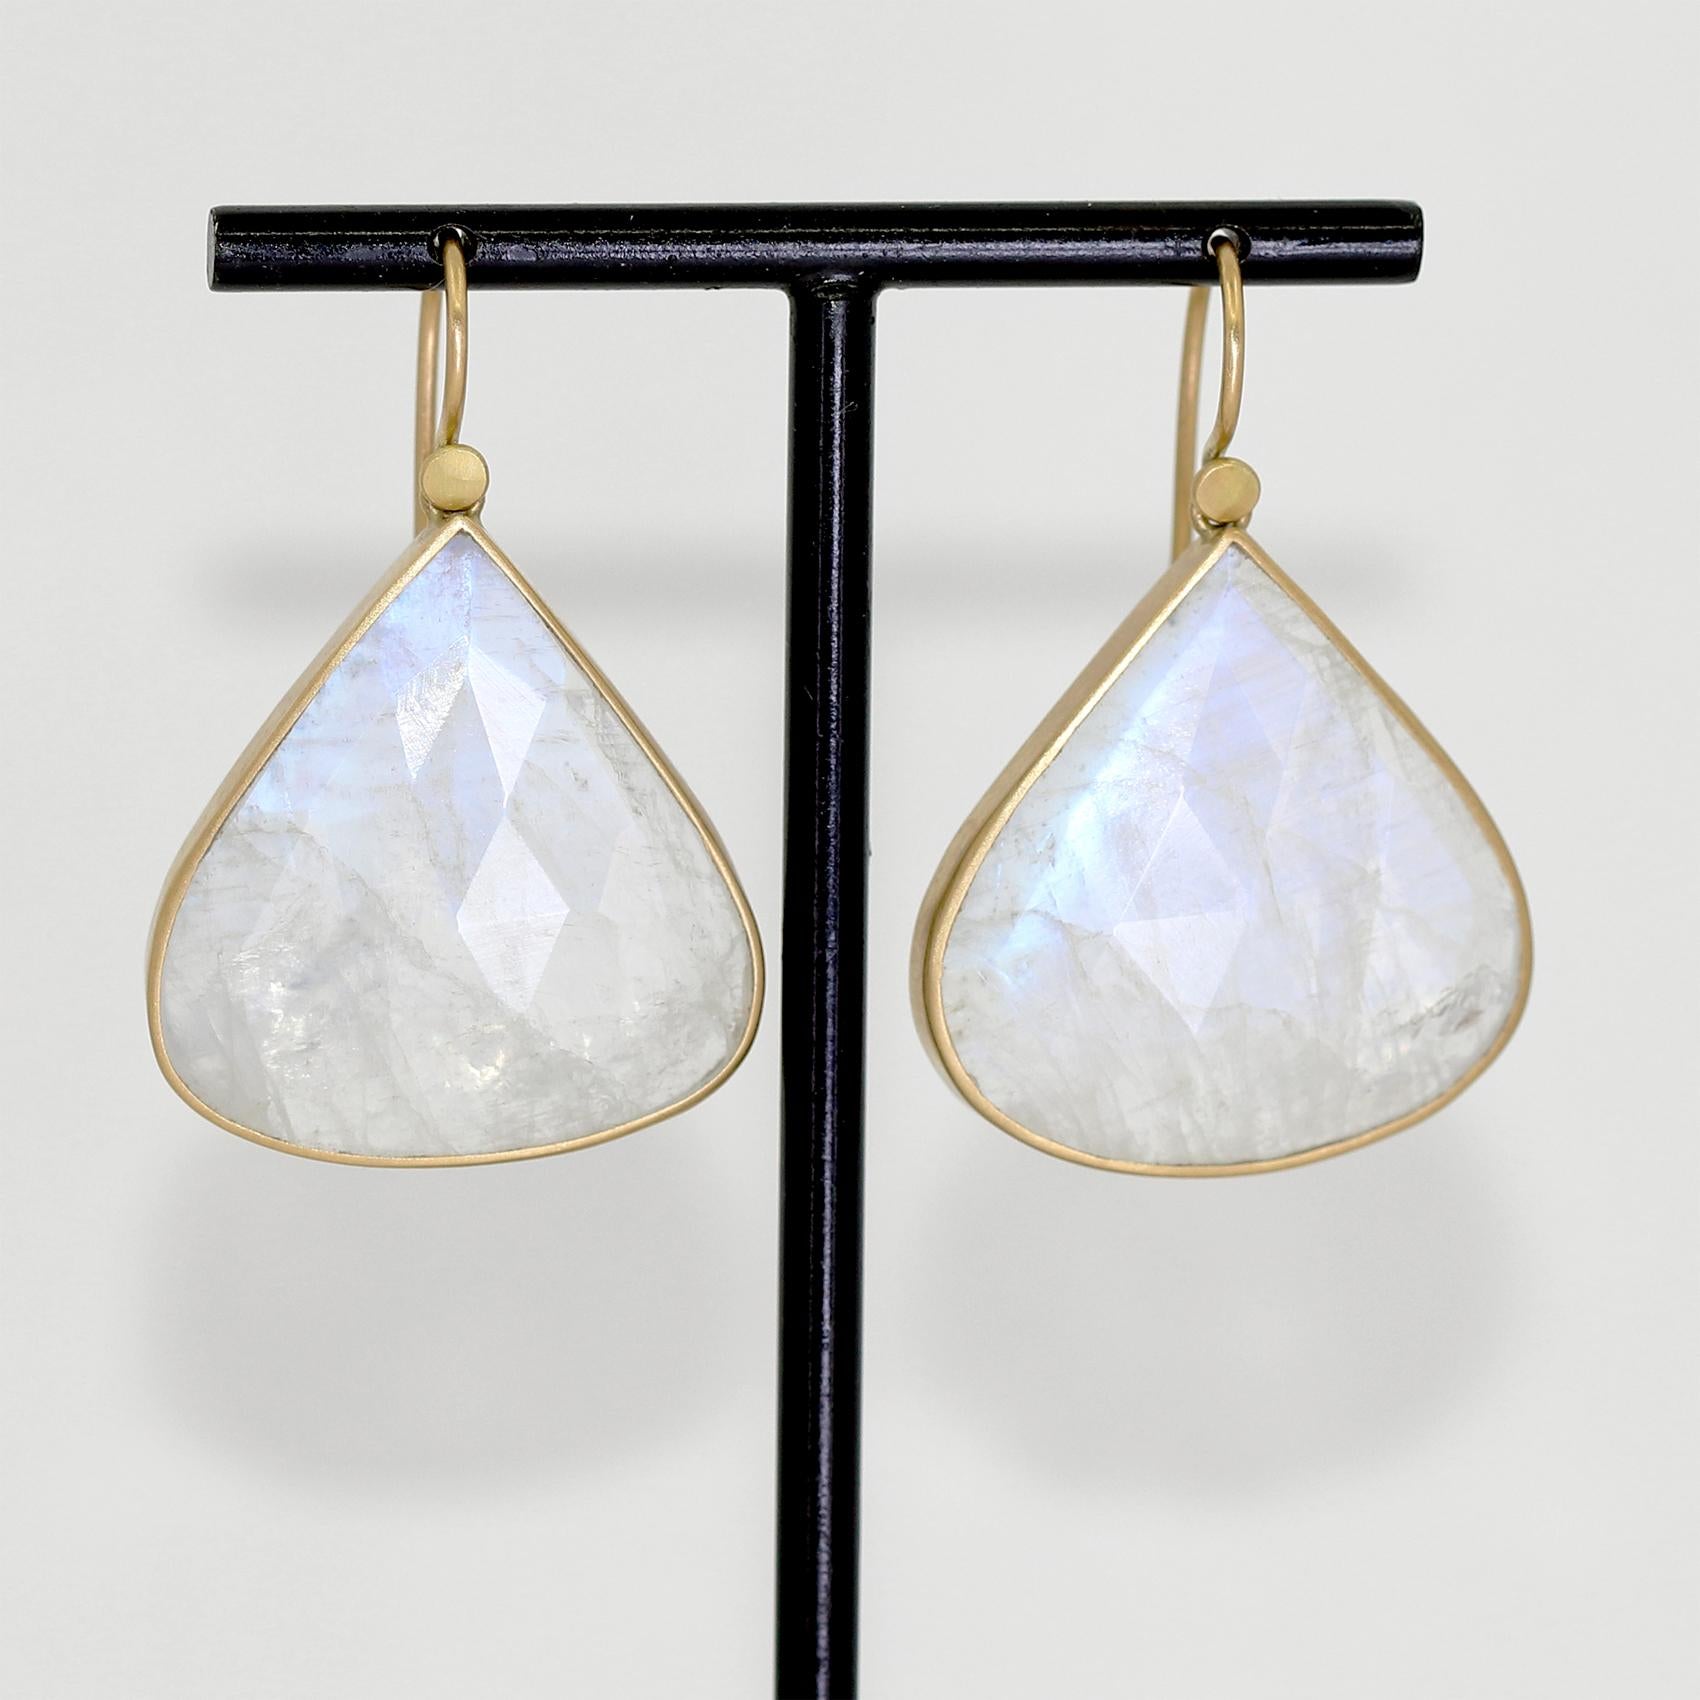 One of a kind earrings hand-fabricated by acclaimed jewelry maker Lola Brooks in the artist's signature-finished 18k yellow gold showcasing a perfectly matched pair of faceted blue moonstone teardrops totaling 36.85 carats, and finished on Lola's